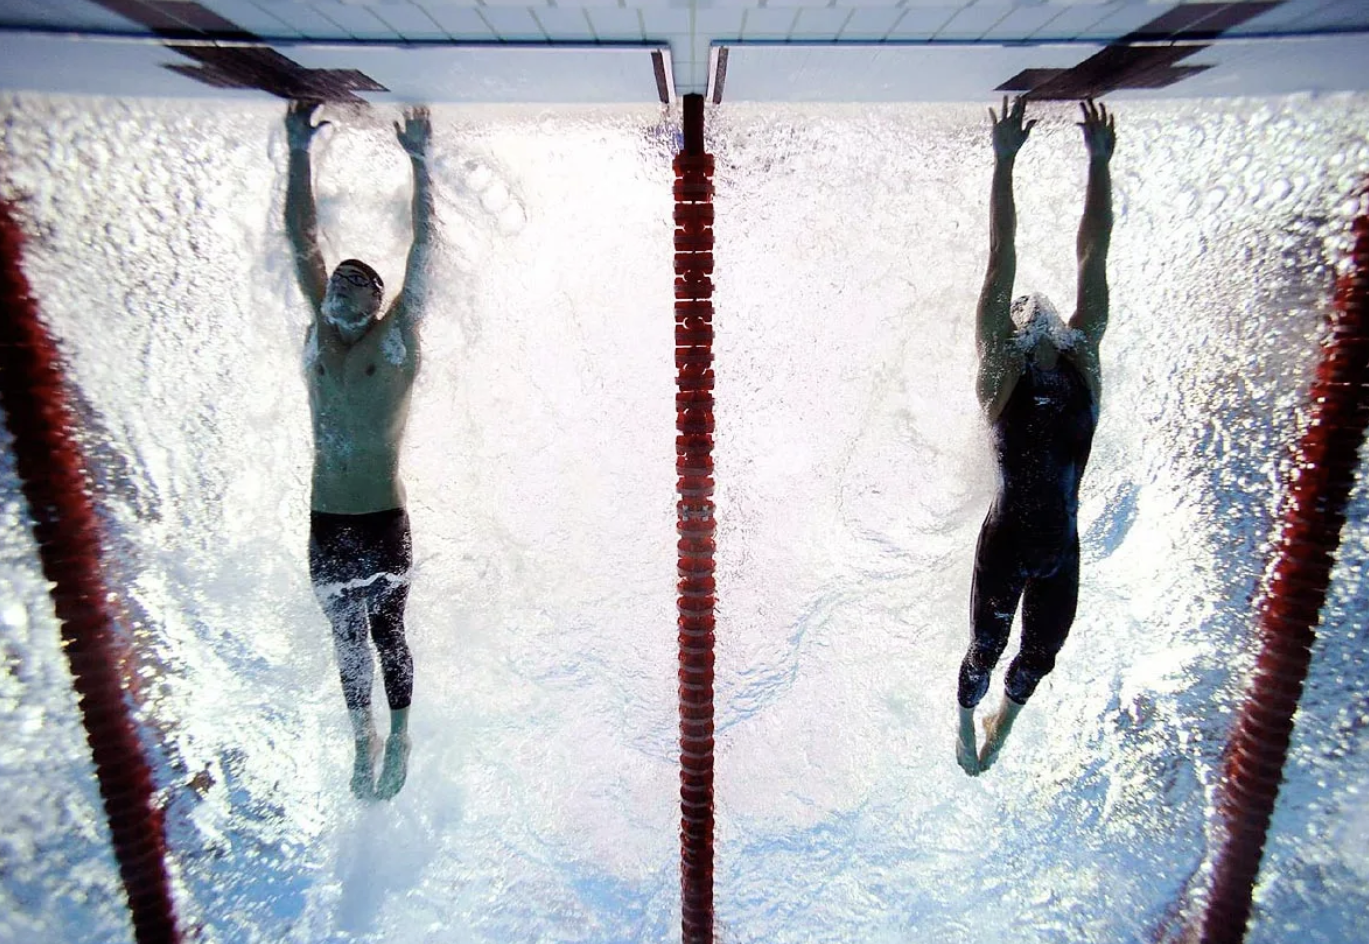 Gold Medal number 7 of 8 for Michael Phelps at the 2008 Beijing Olympics. Photo by: Heinz Kluetmeier.